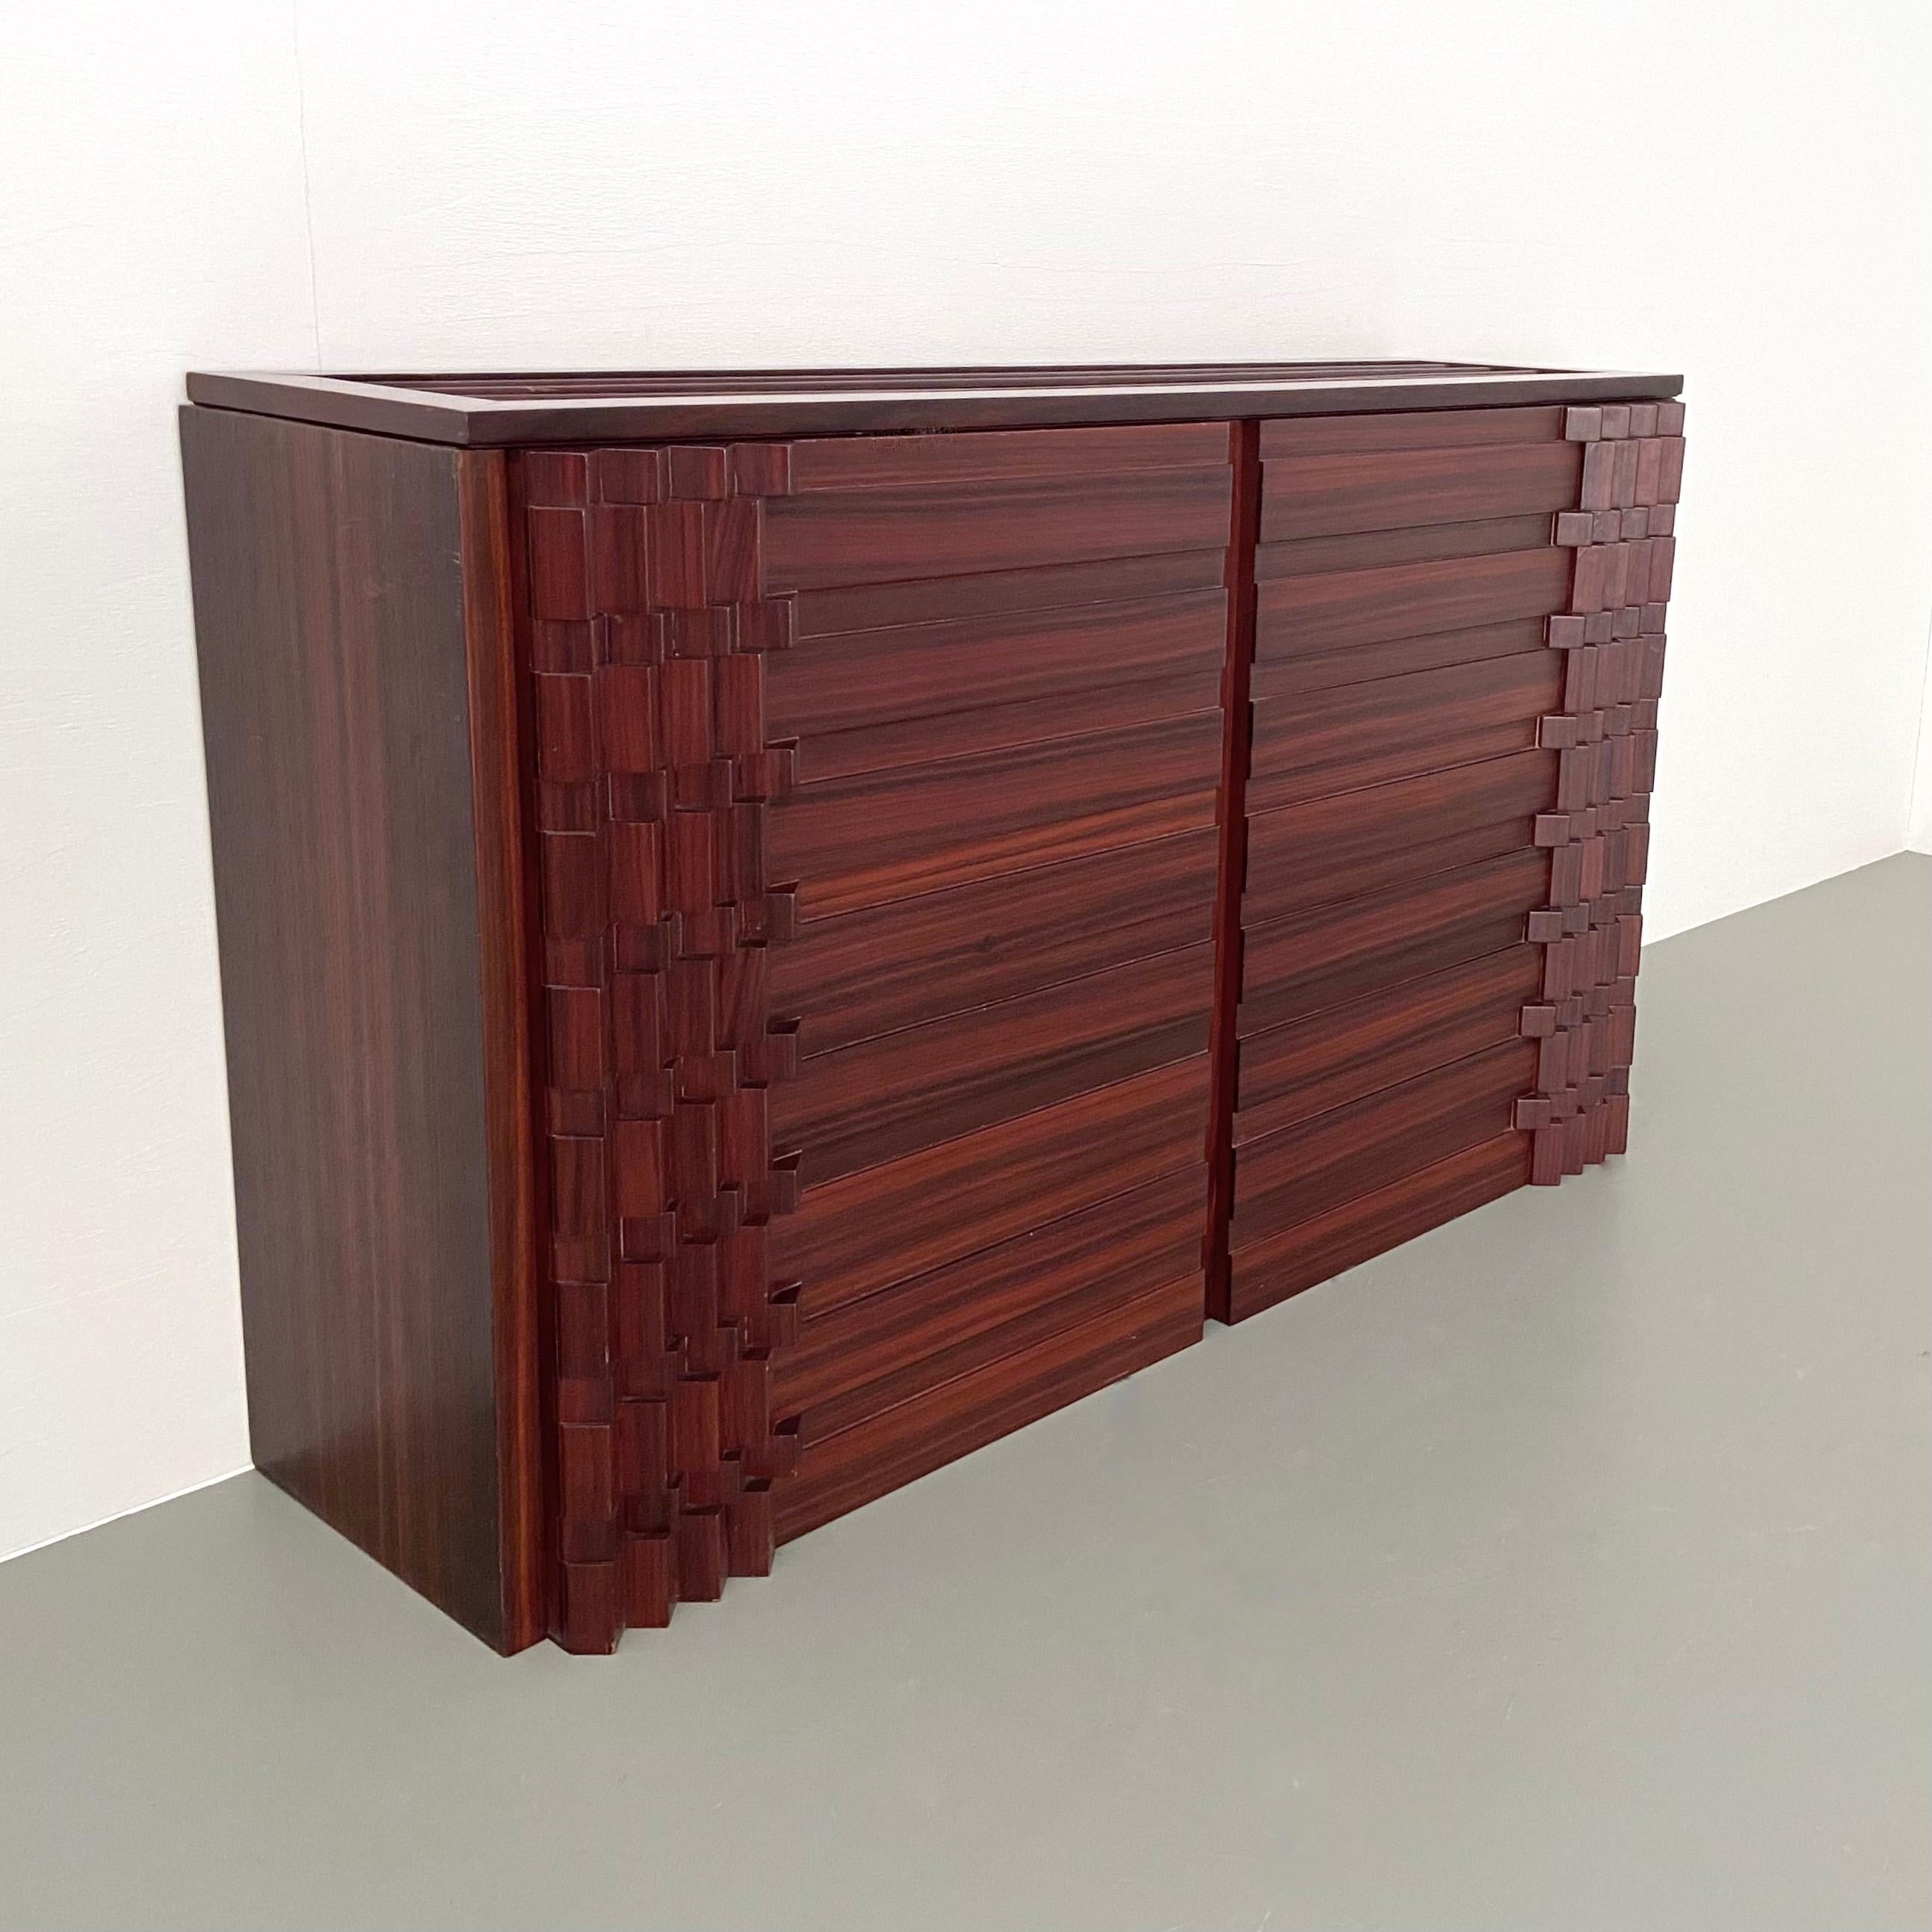 'Diamante' Cabinet by Luciano Frigerio, Italy, 1968 In Good Condition For Sale In Amsterdam, NL